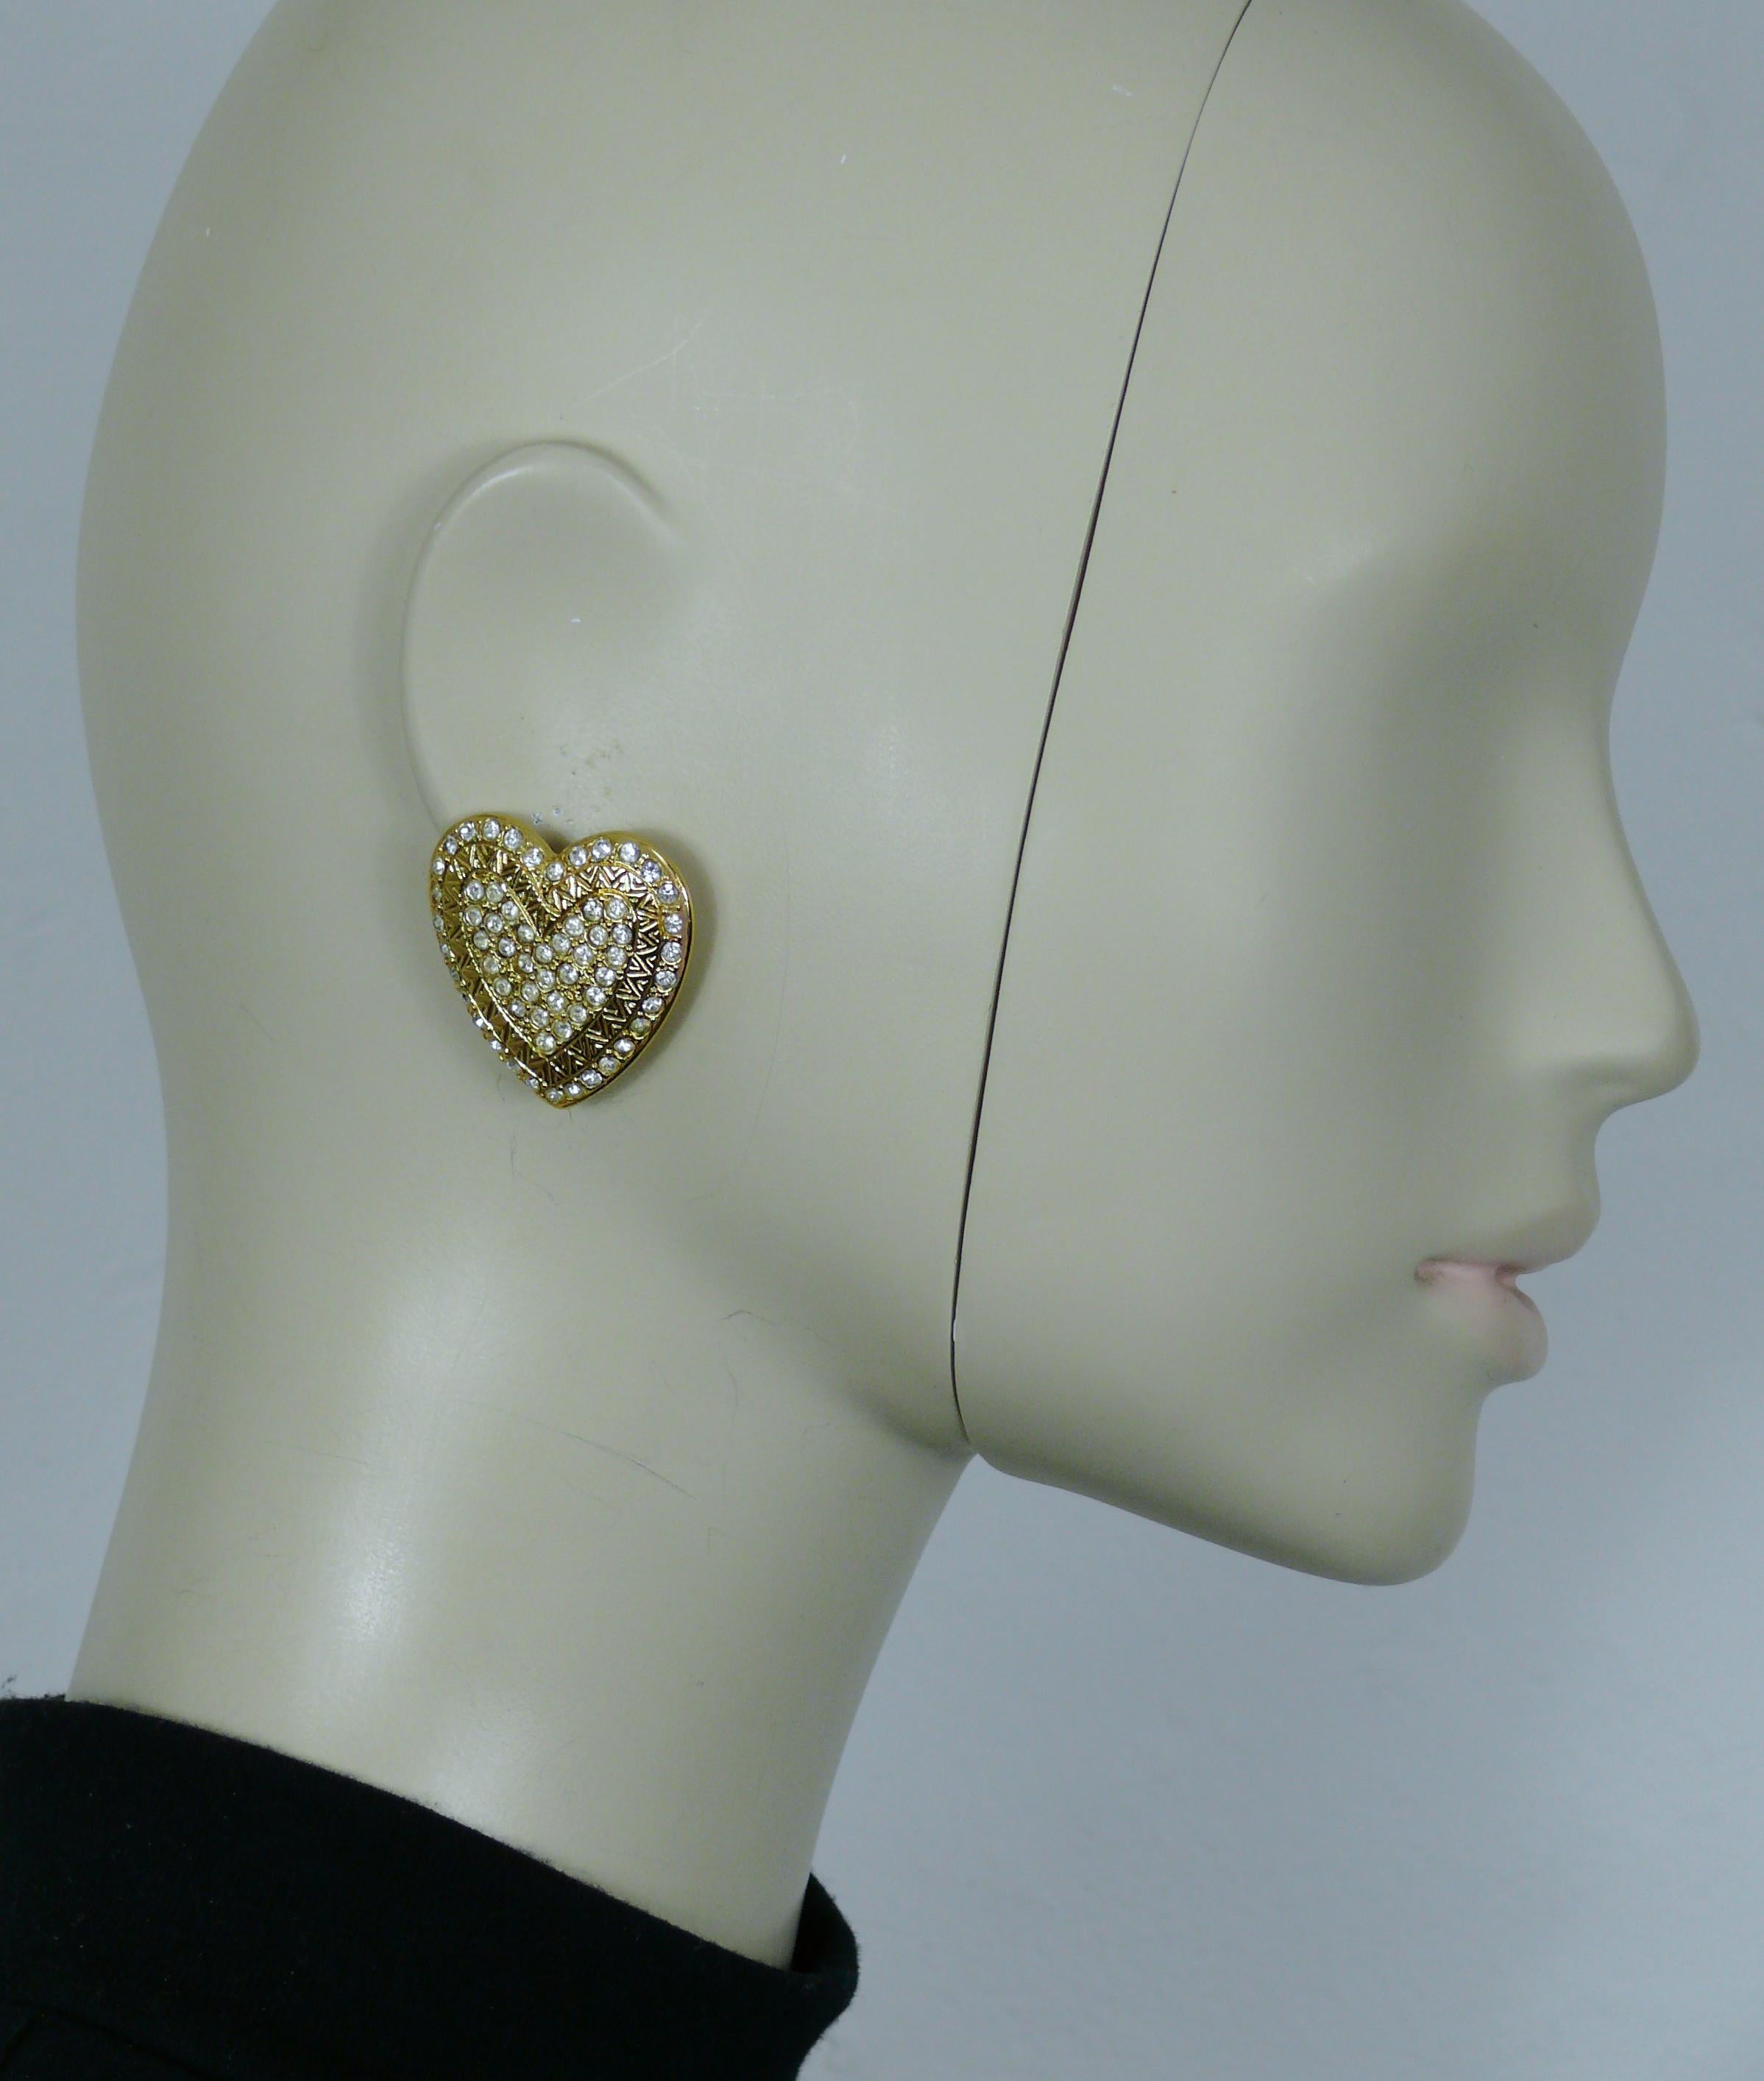 YVES SAINT LAURENT vintage gold tone heart clip-on earrings embellished with clear crystals.

Embossed YSL Made in France.

Indicative measurements : max. height approx. 3.4 cm (1.34 inches) / max. width approx. 3.2 cm (1.26 inches).

Weight per